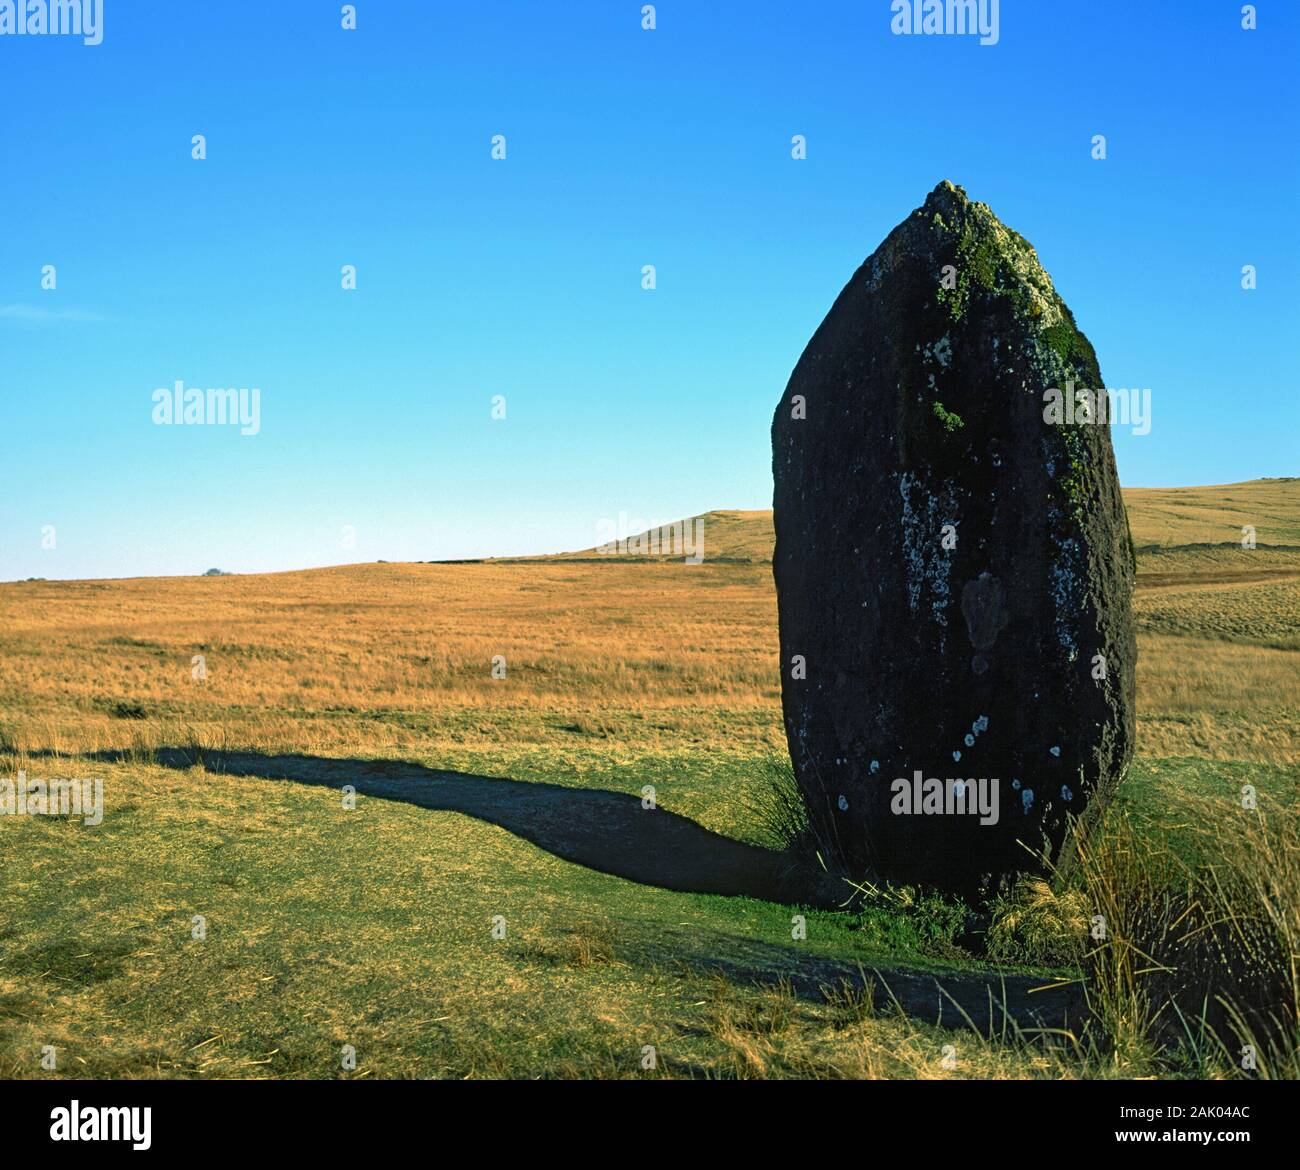 Mean llia Standing Stone, Fforest Fawr, Brecon Beacons National Park, Powys, Wales. Stock Photo